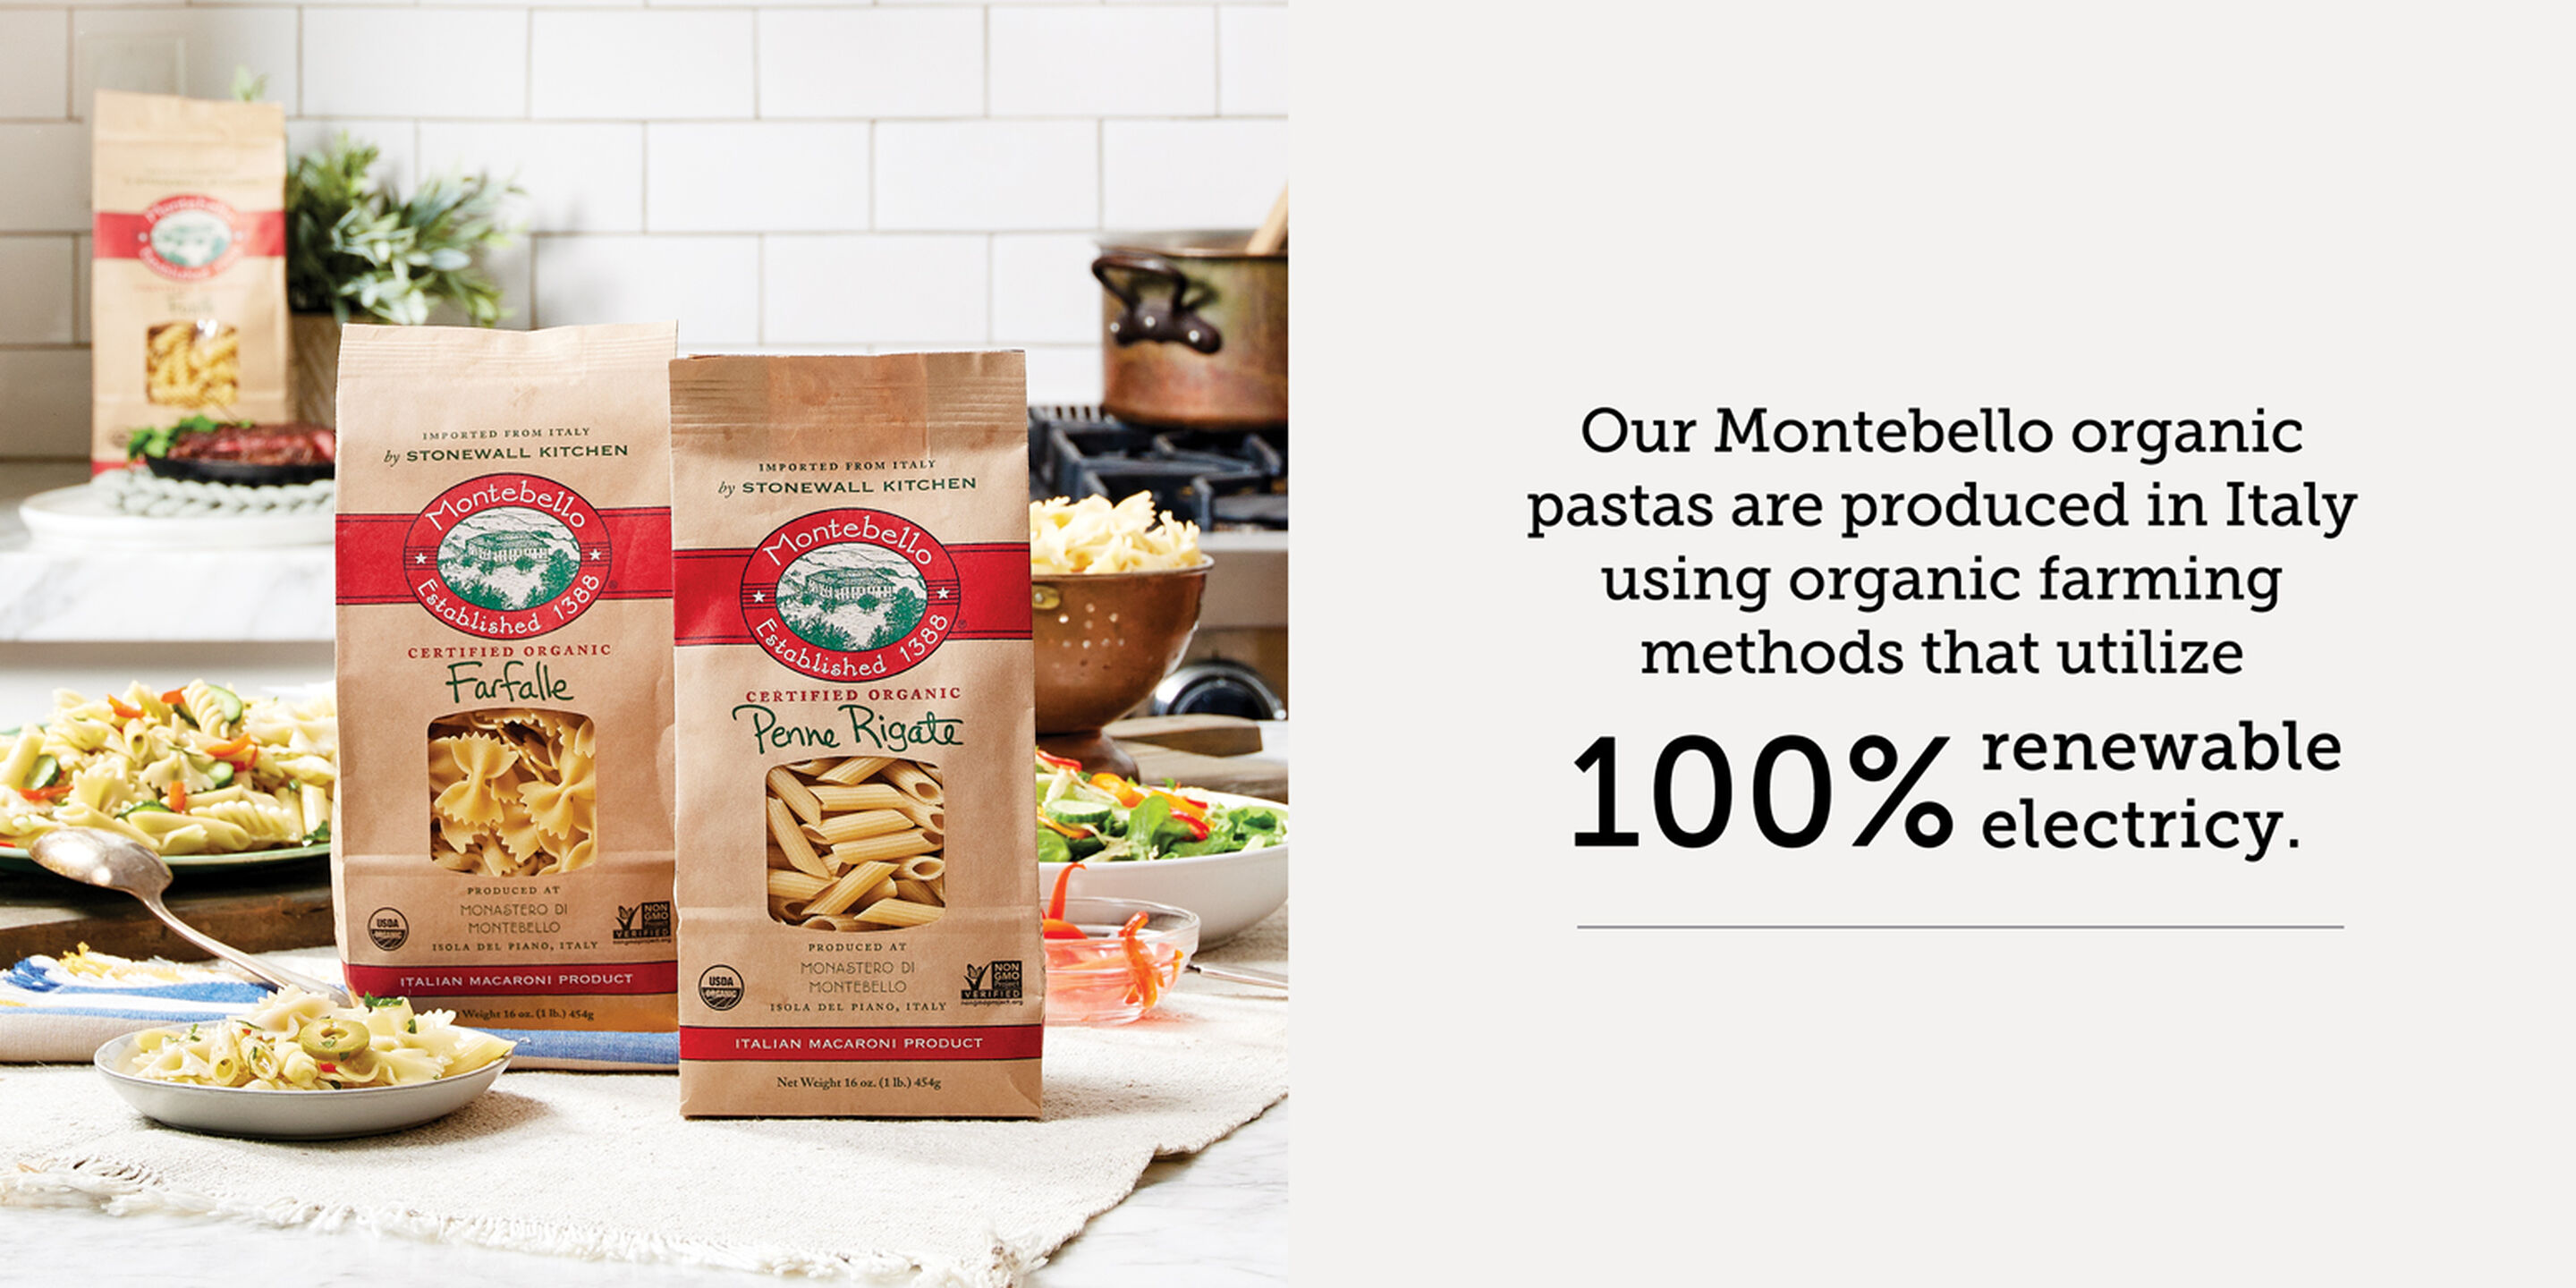 Our Montebello organic pastas are produced in Italy using organic farming methods that utilize 100% renewable electricity 